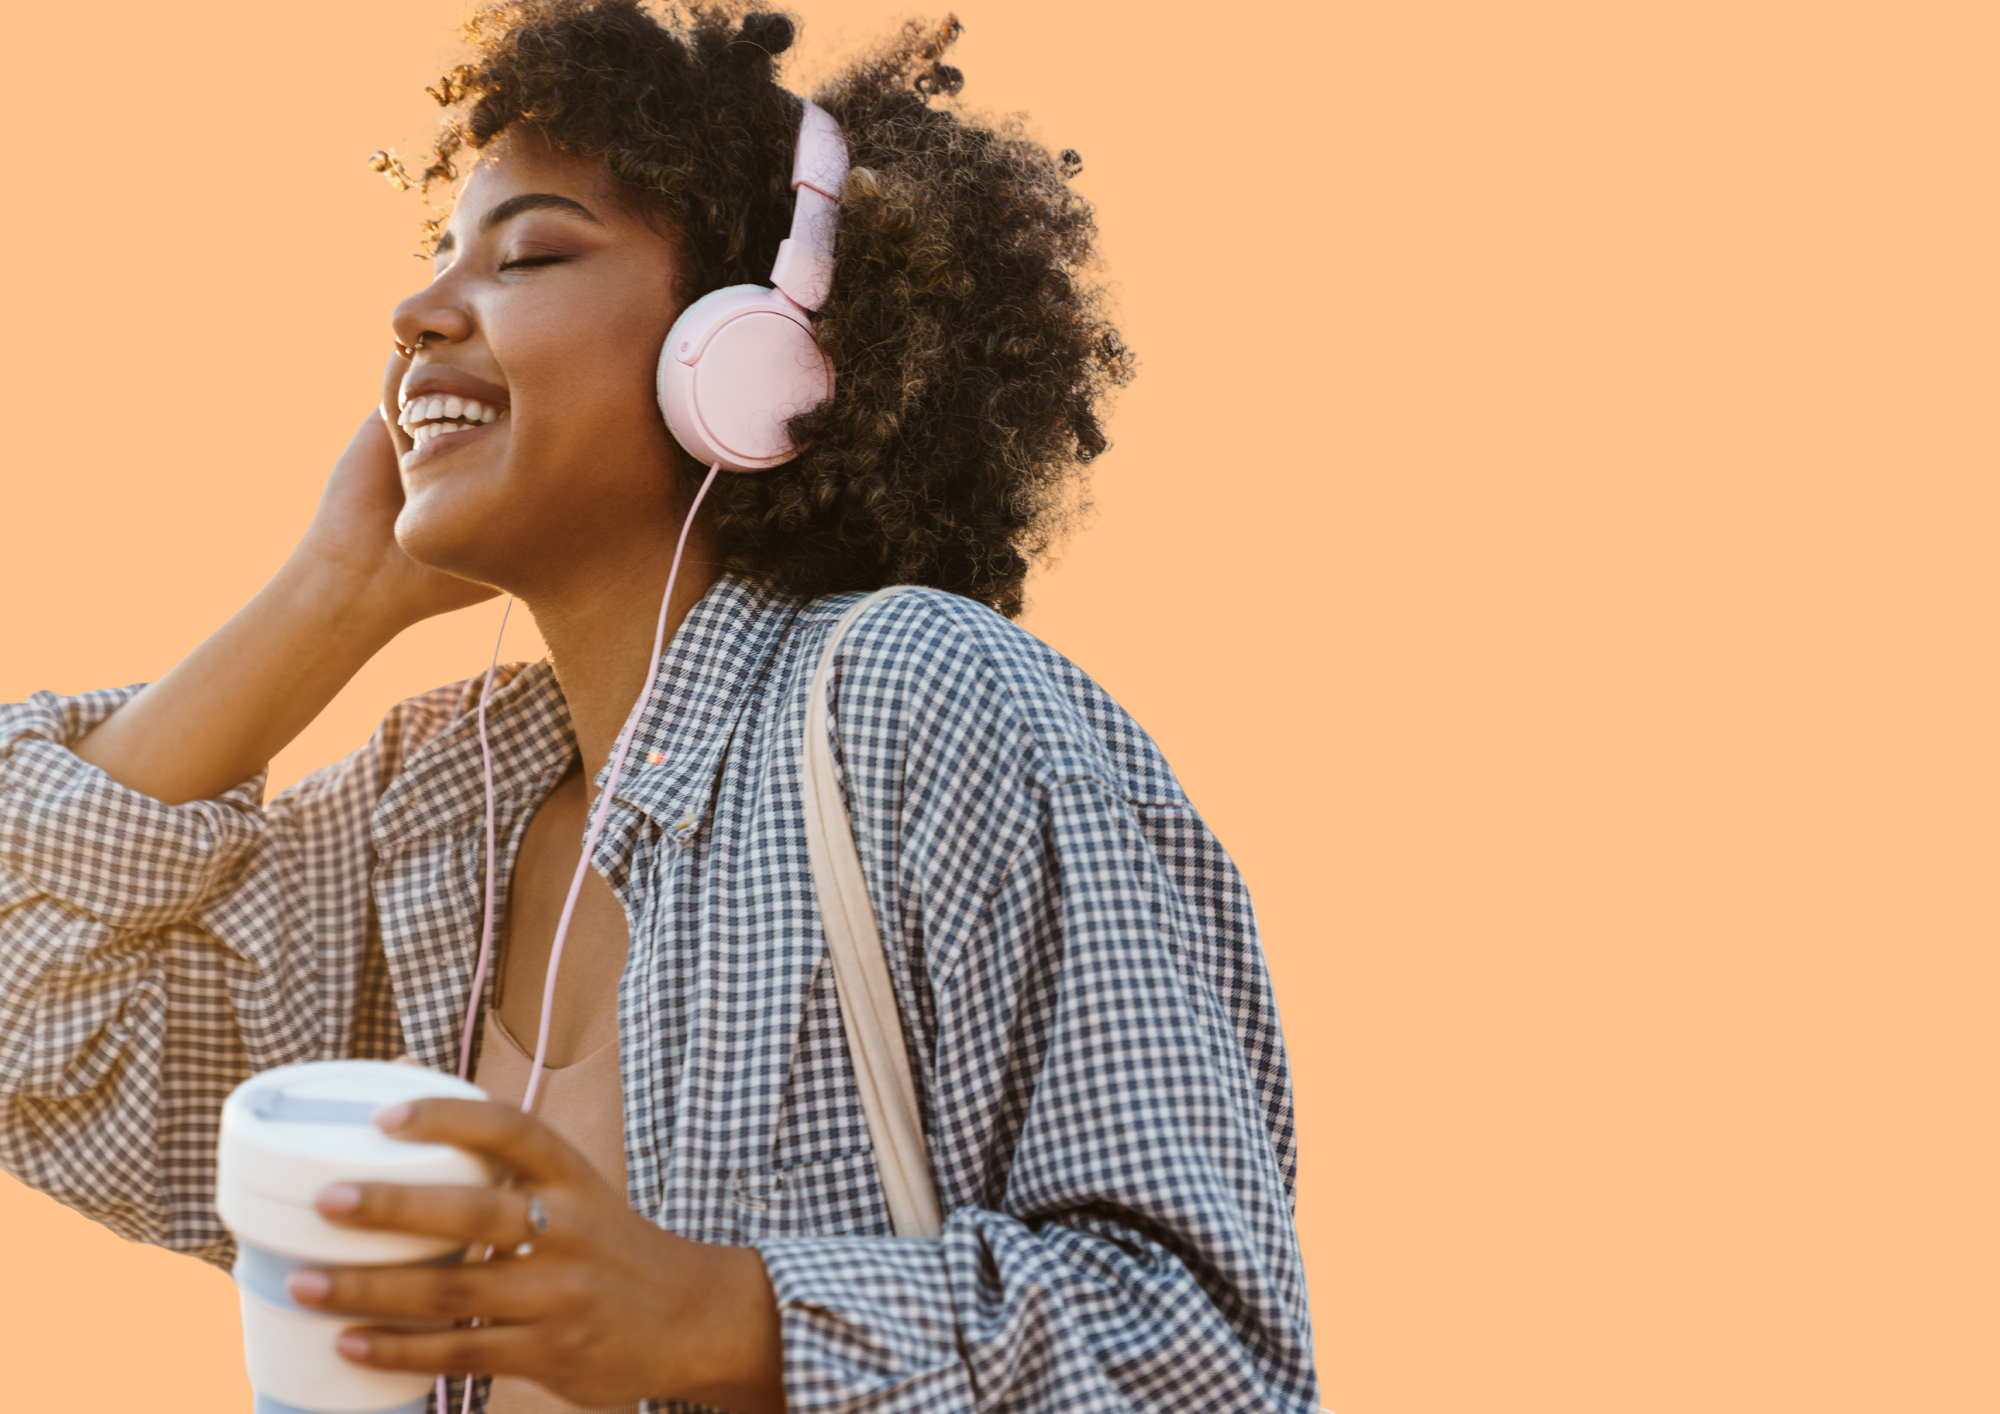 Young woman is listening to music on headphones and smiling. Orange Background.